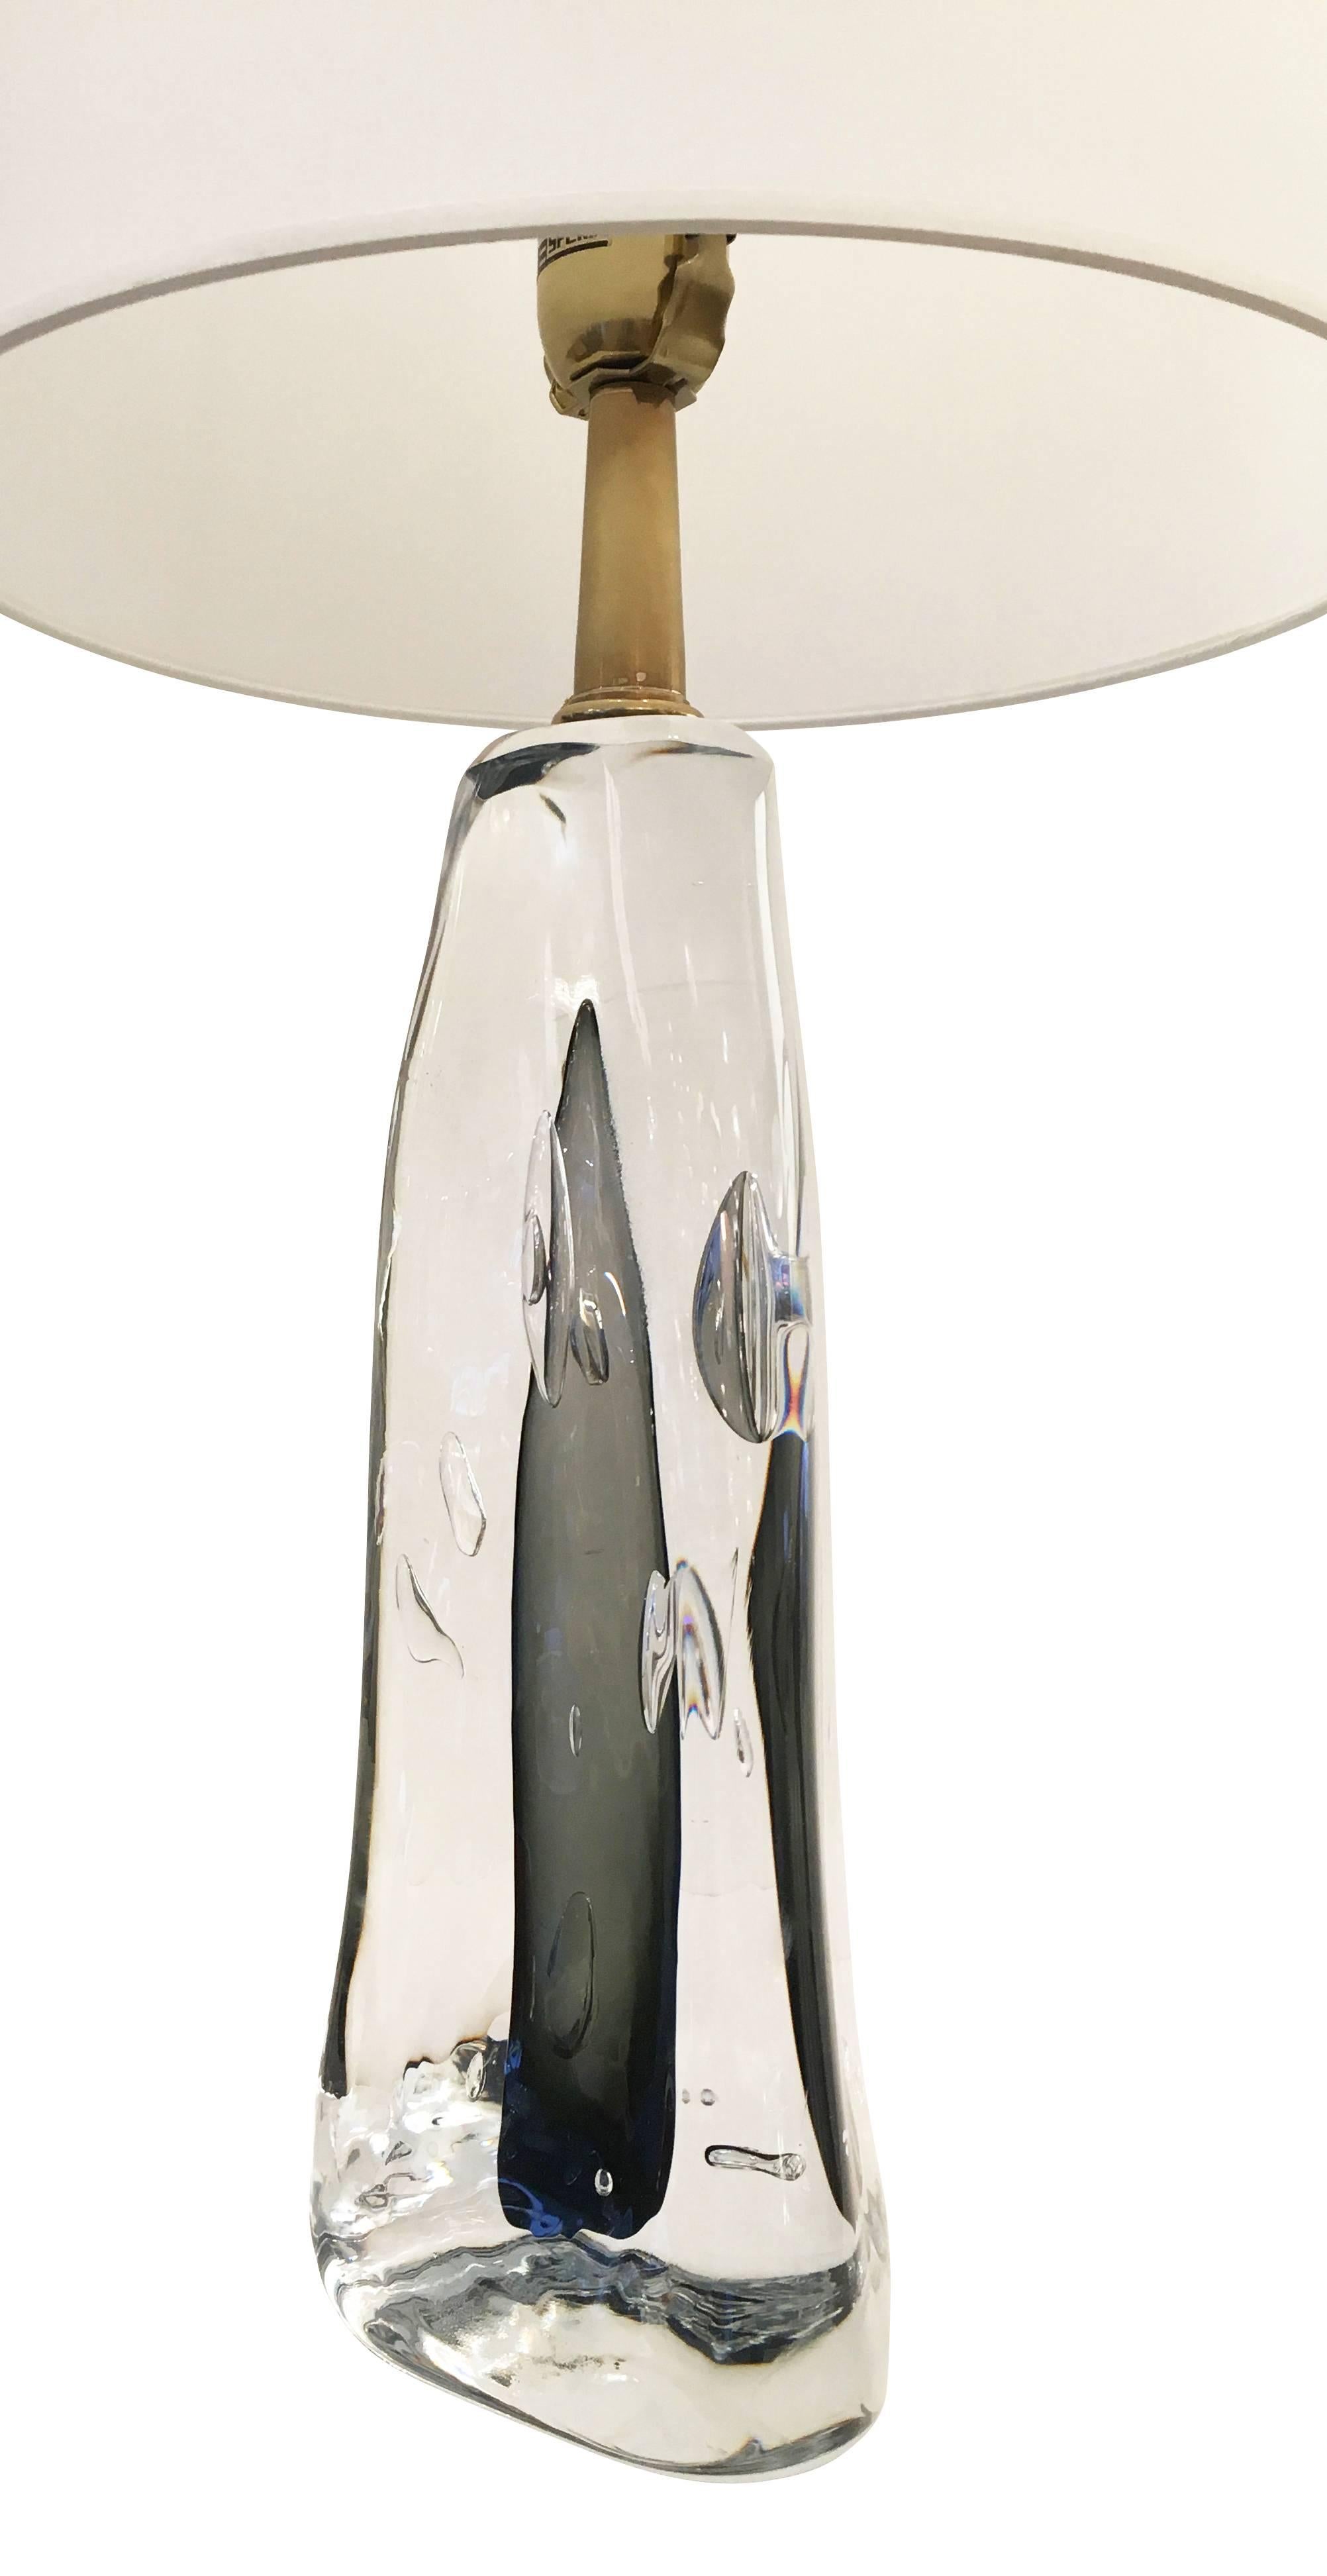 Contemporary “Bolla” Infused Glass Table Lamp by Esperia  for Gaspare Asaro